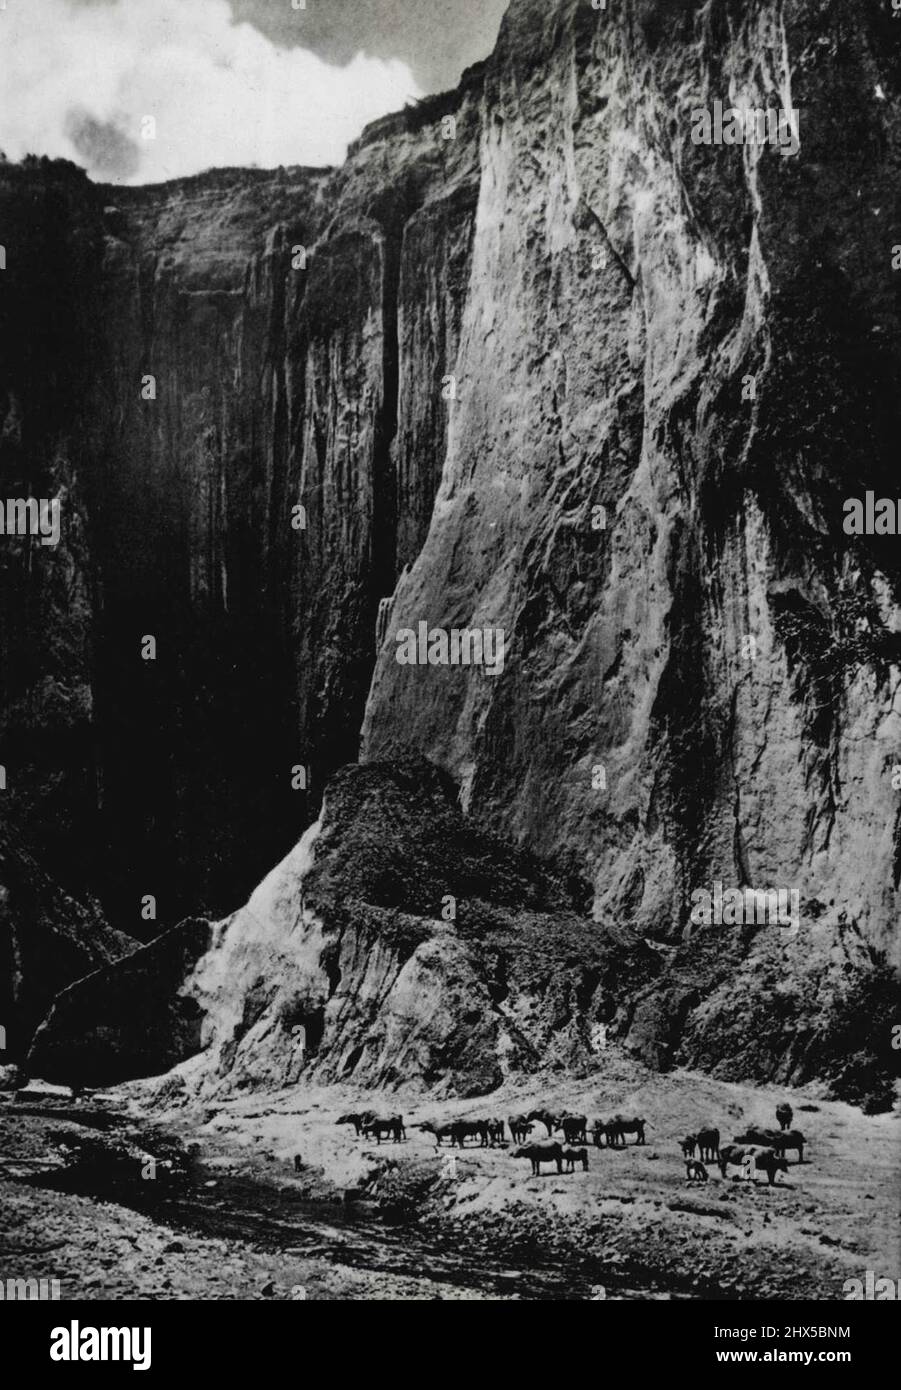 West General Sumatra -- View of the Karbouw Gorge (Buffalo Gorge) near Fort de Kock in the Padang Highlands. This gorge is formed mainly by sheer perpendicular walls, hundreds of feet high. March 31, 1950. Stock Photo